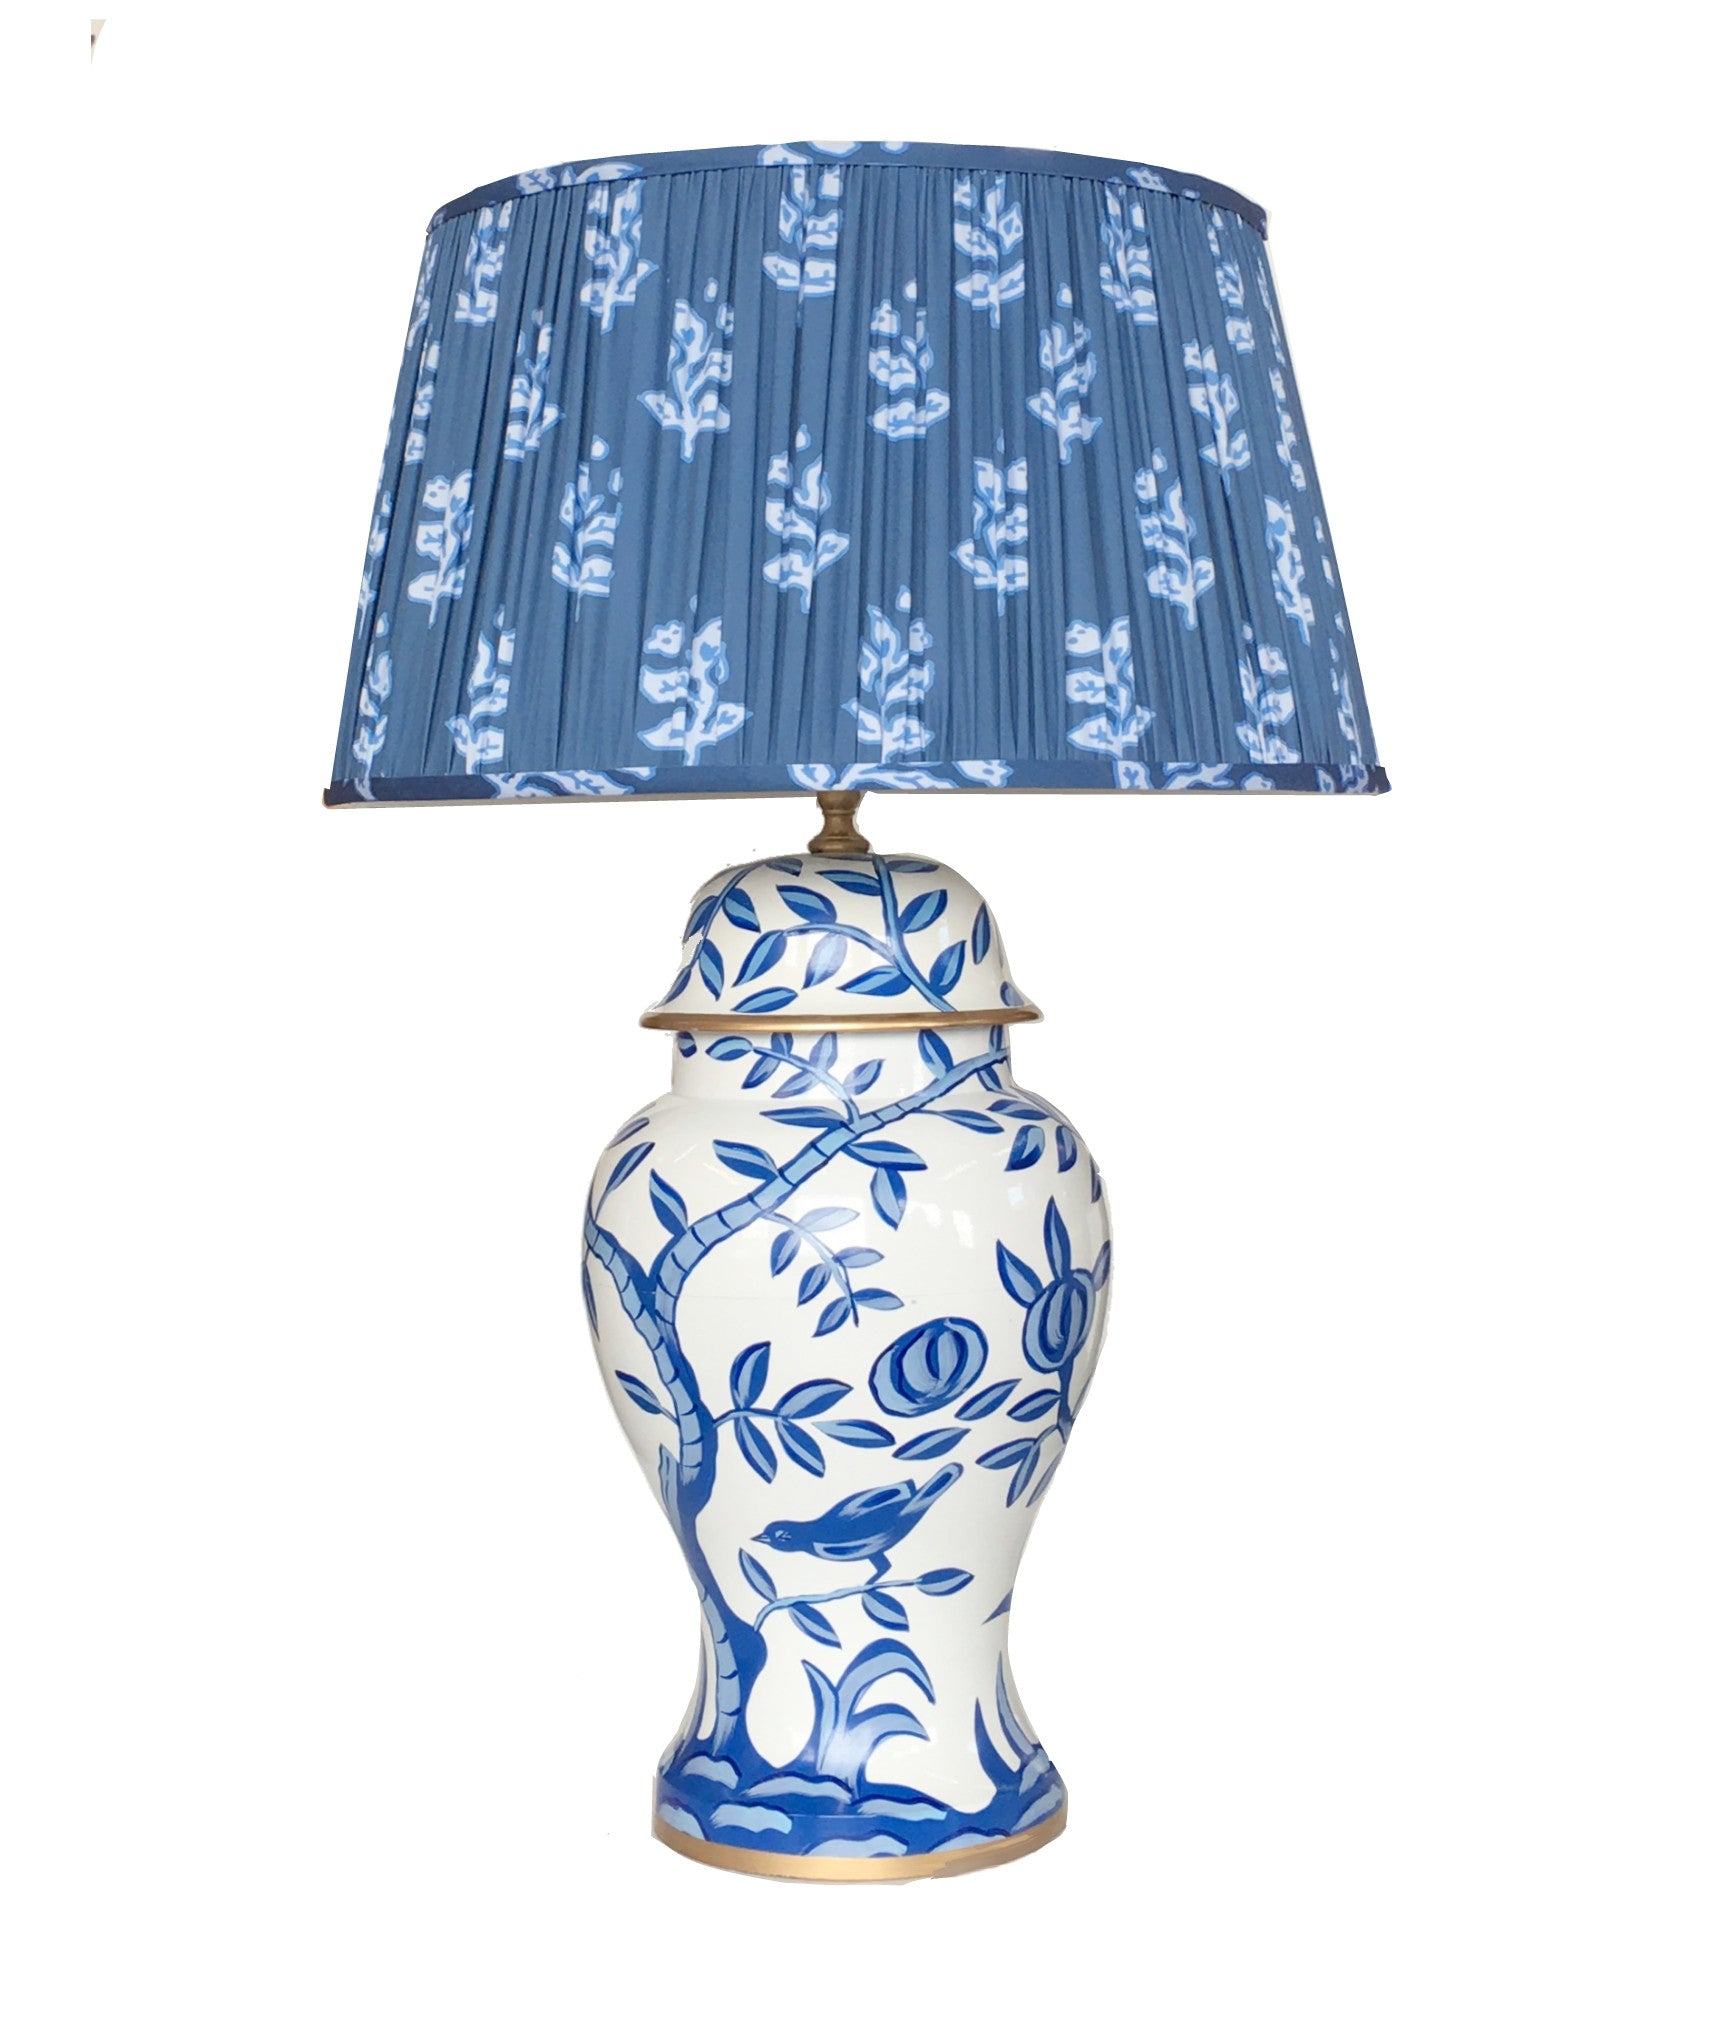 Dana Gibson Cliveden Blue Lamp with Pleated Sprig Shade